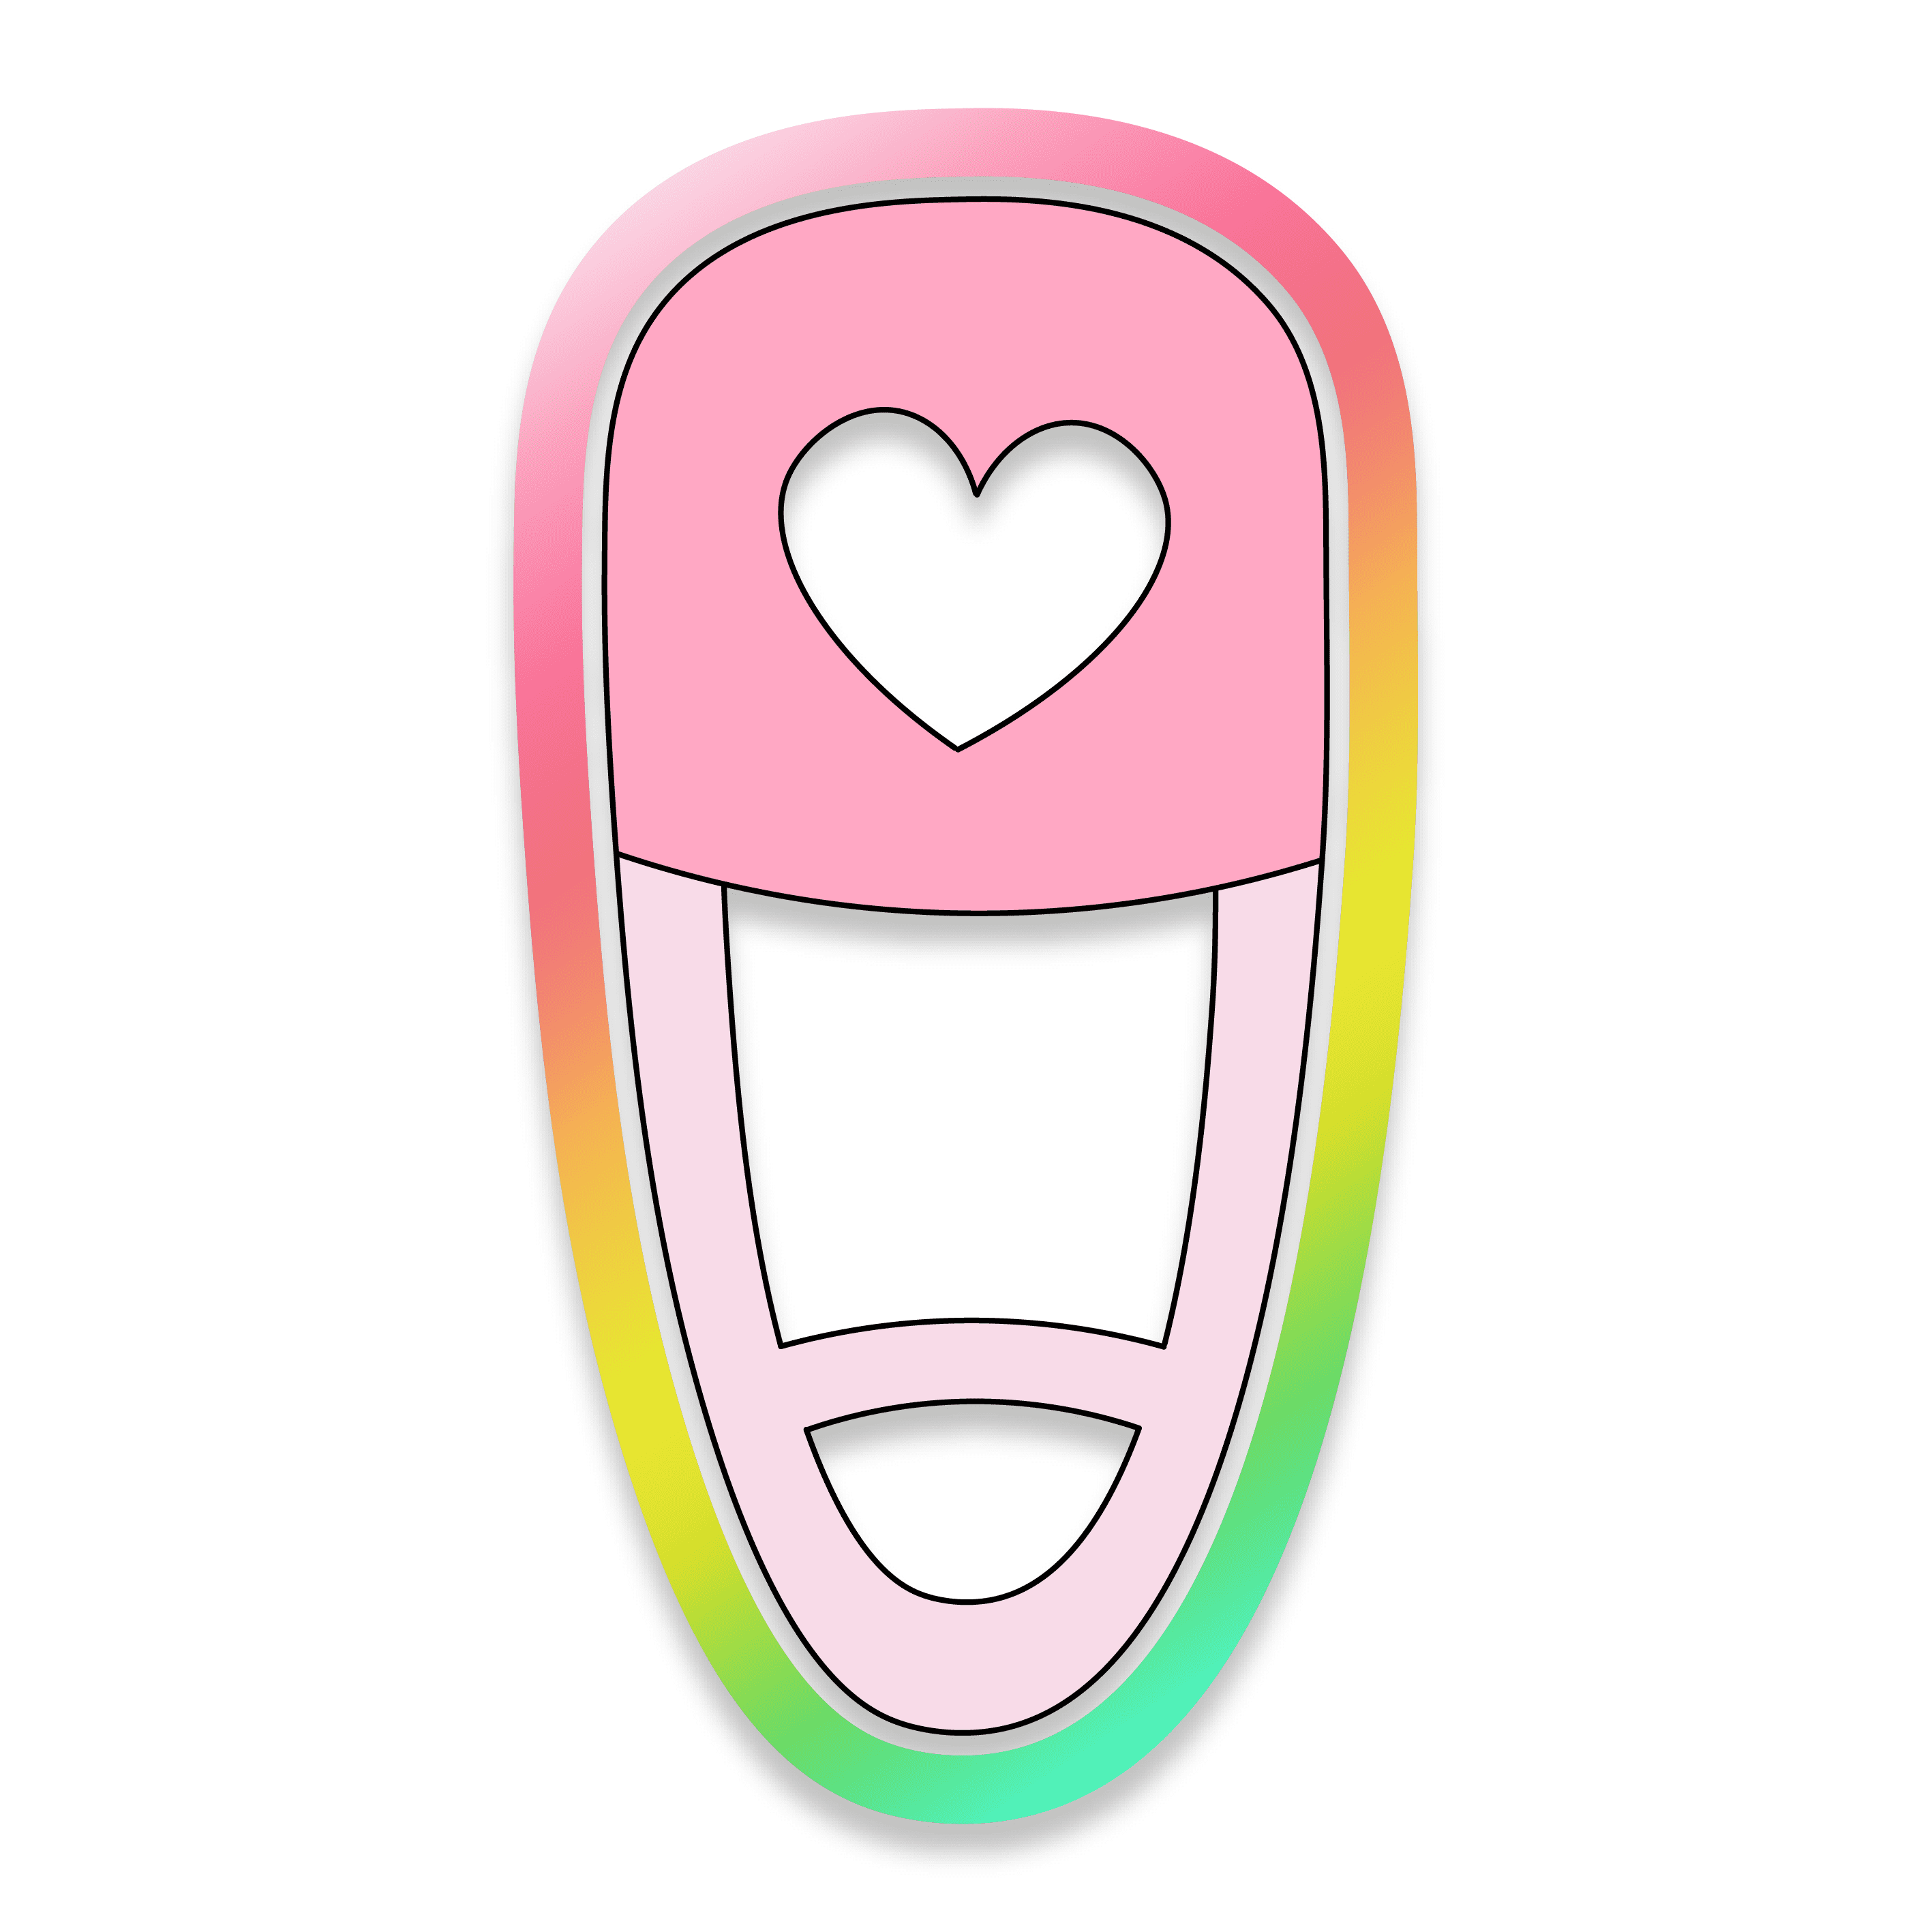 Digital drawing of baby pin with heart cookie cutter.